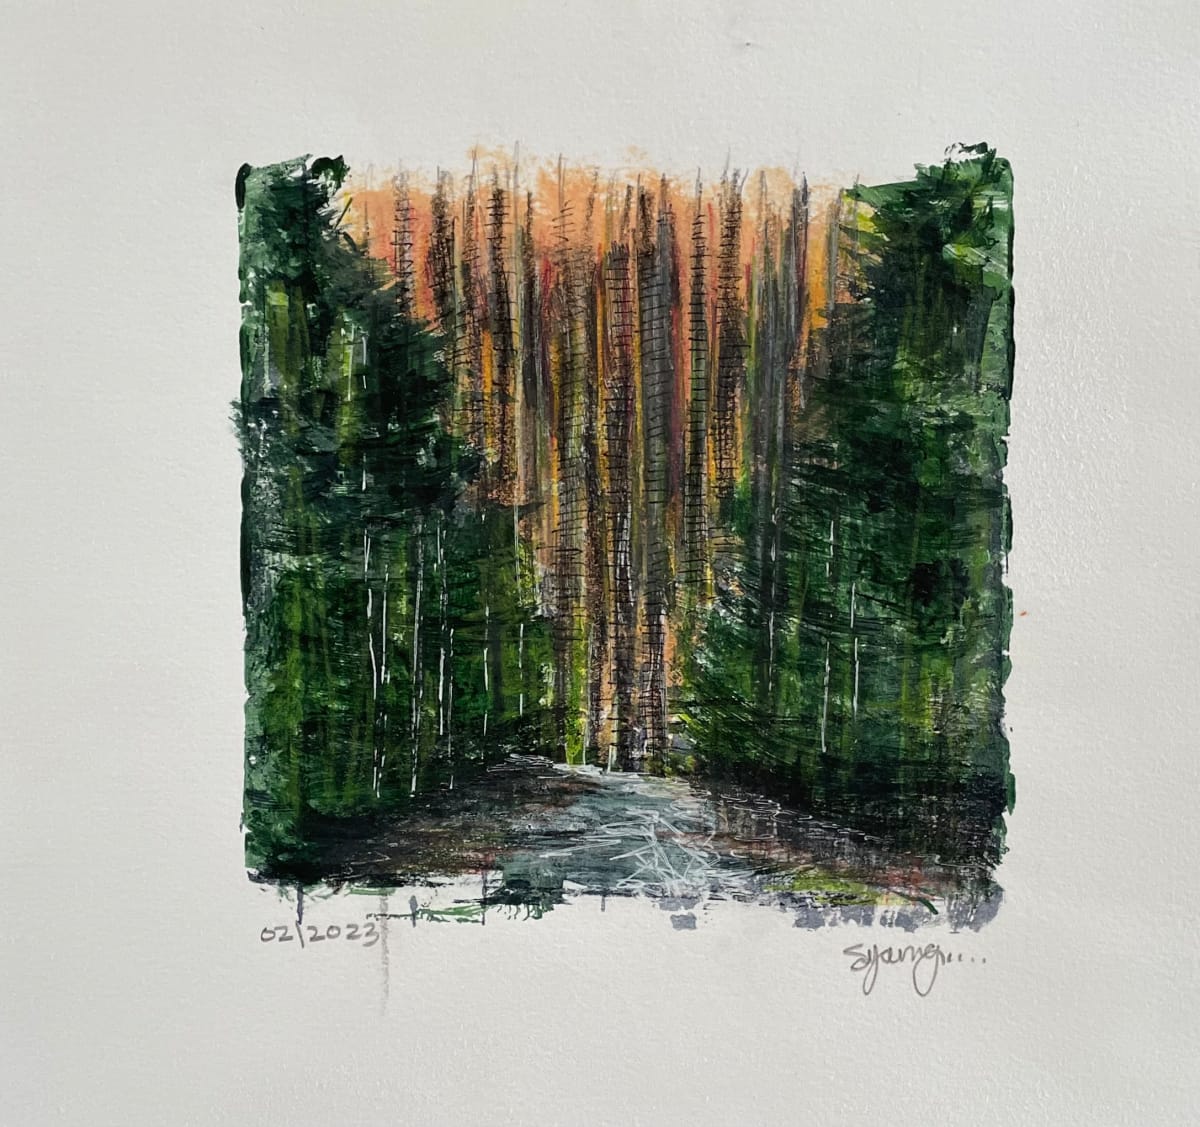 Deep in the Forest by Scott D.S. Young  Image: This piece was created by using Gelli Plates, a reusable printing plate that lets you make monoprints without a large, expensive press. 

They look and feel like gelatin plates but don't use animal-based gelatin. 